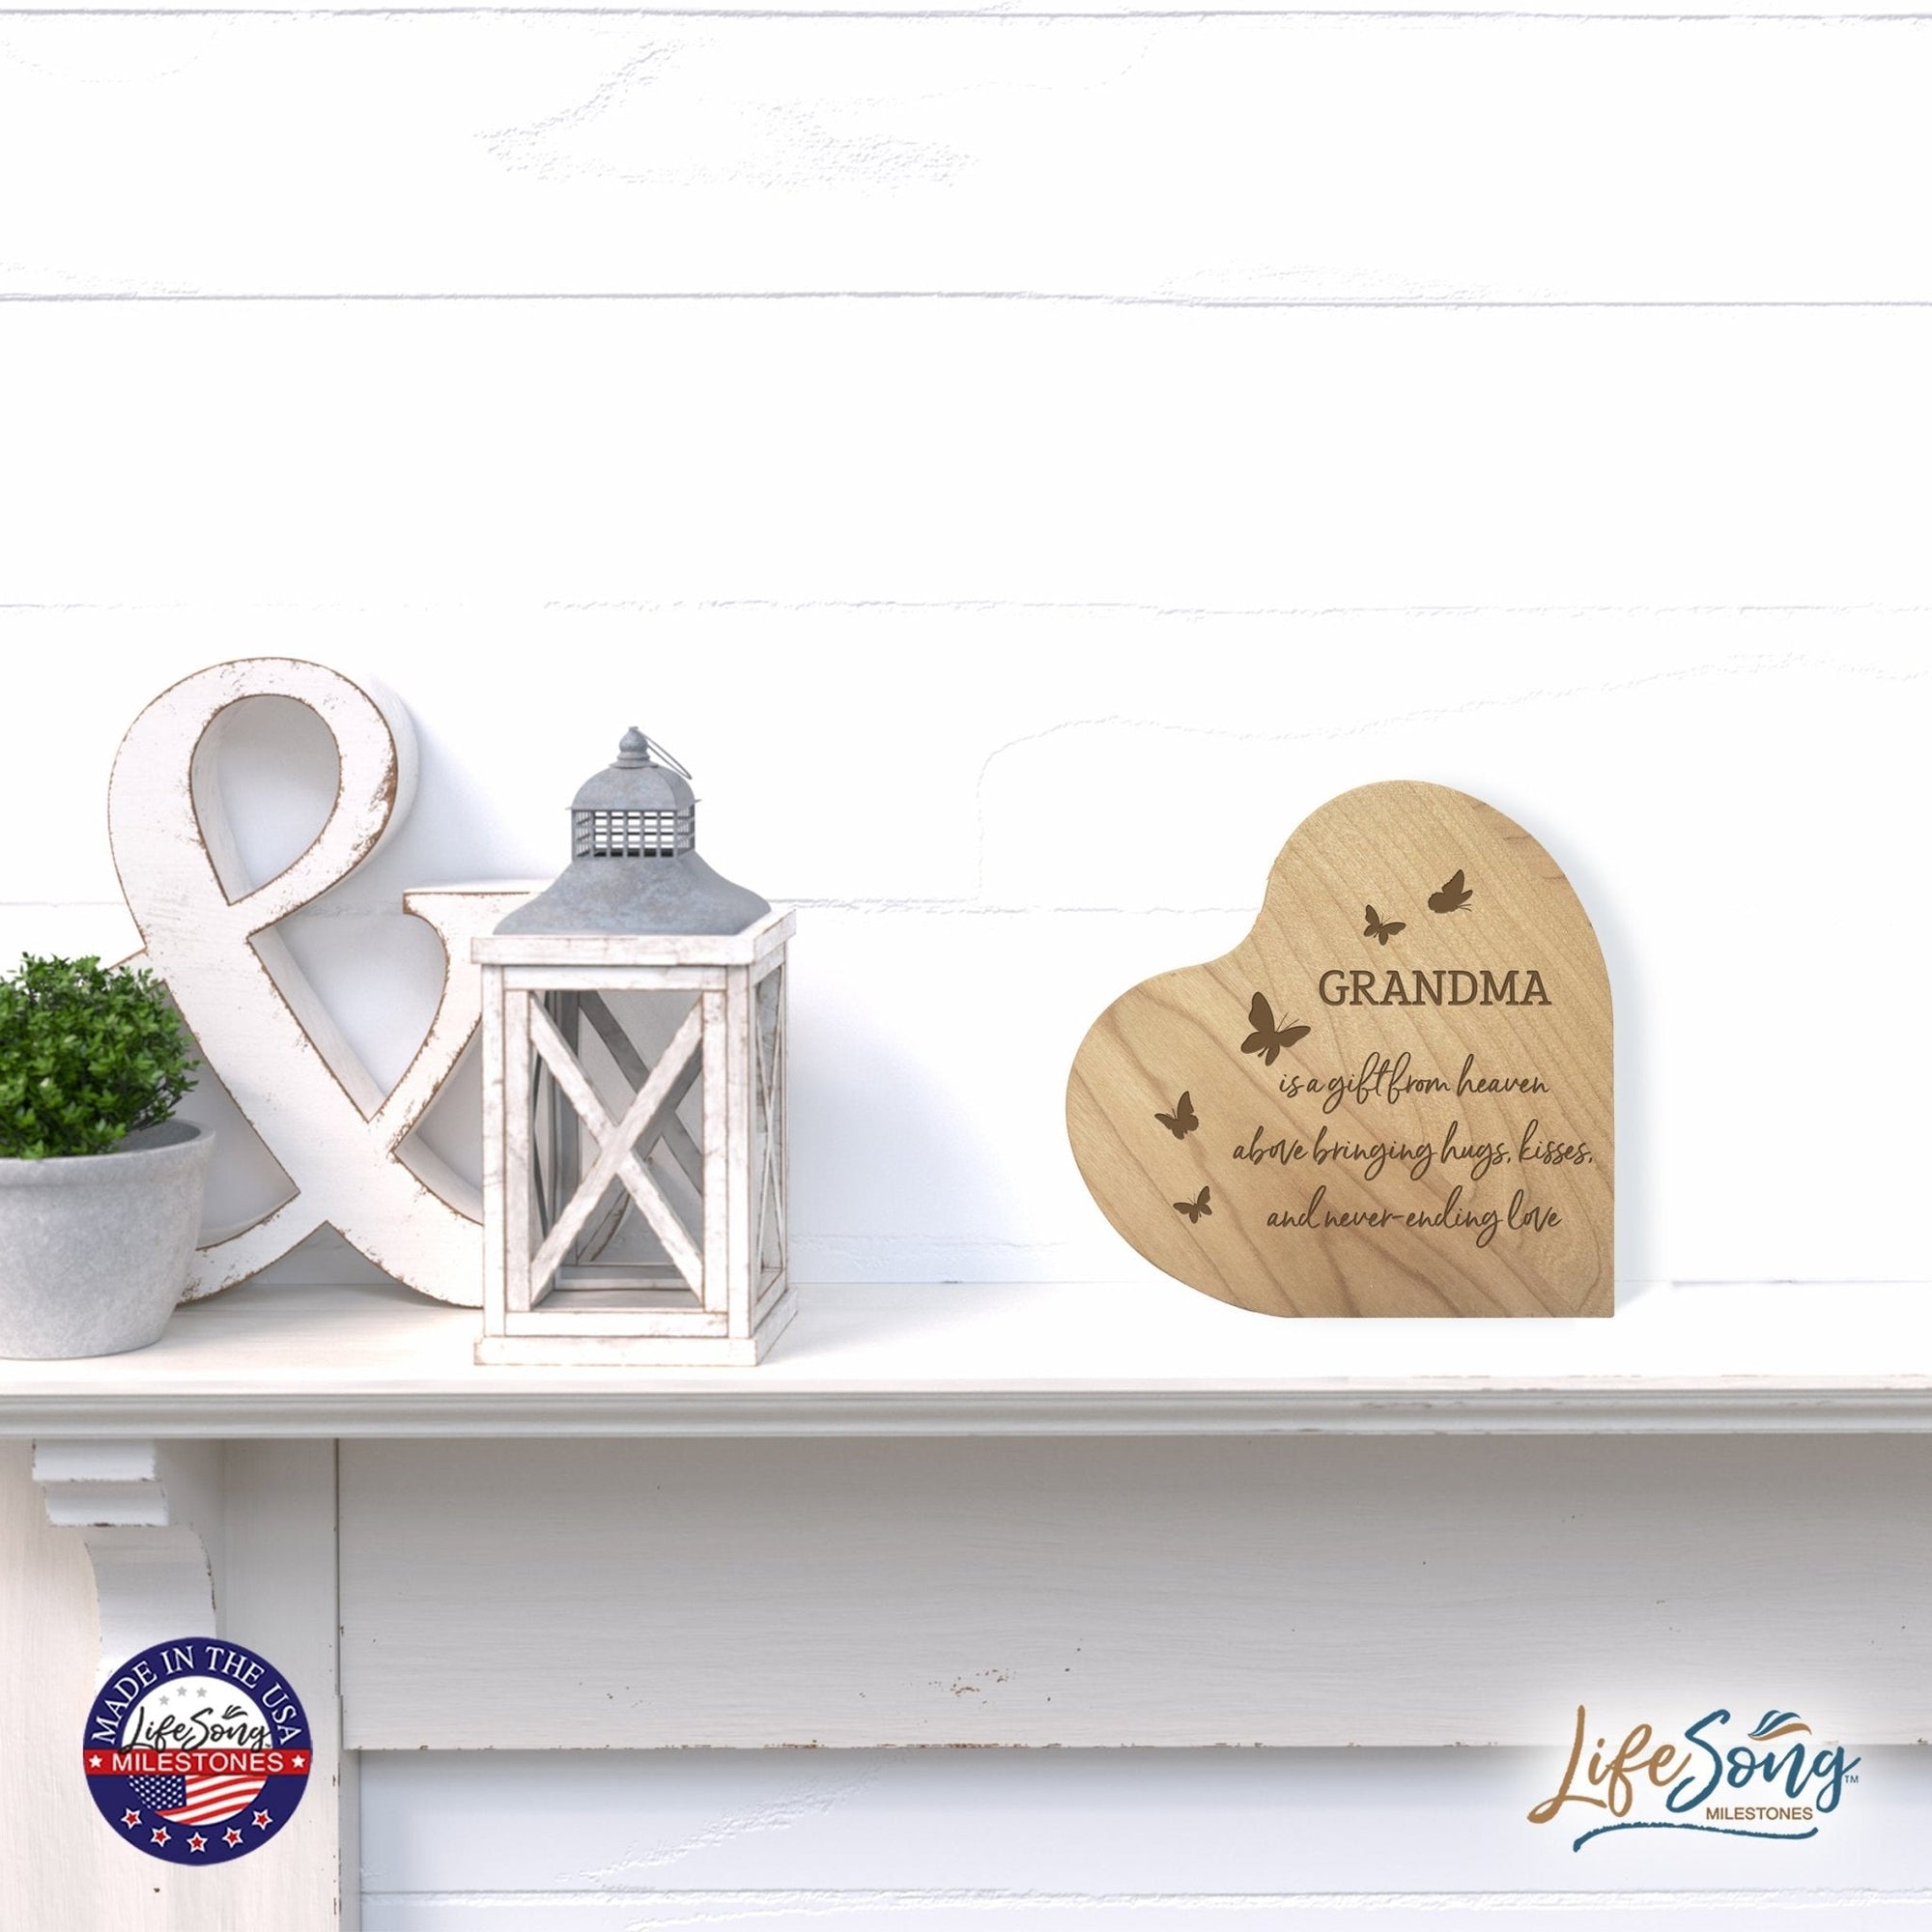 Modern Grandmother’s Love Solid Wood Heart Decoration With Inspirational Verse Keepsake Gift 5x5.25 - Grandma Is A Gift = Never-ending Love - LifeSong Milestones